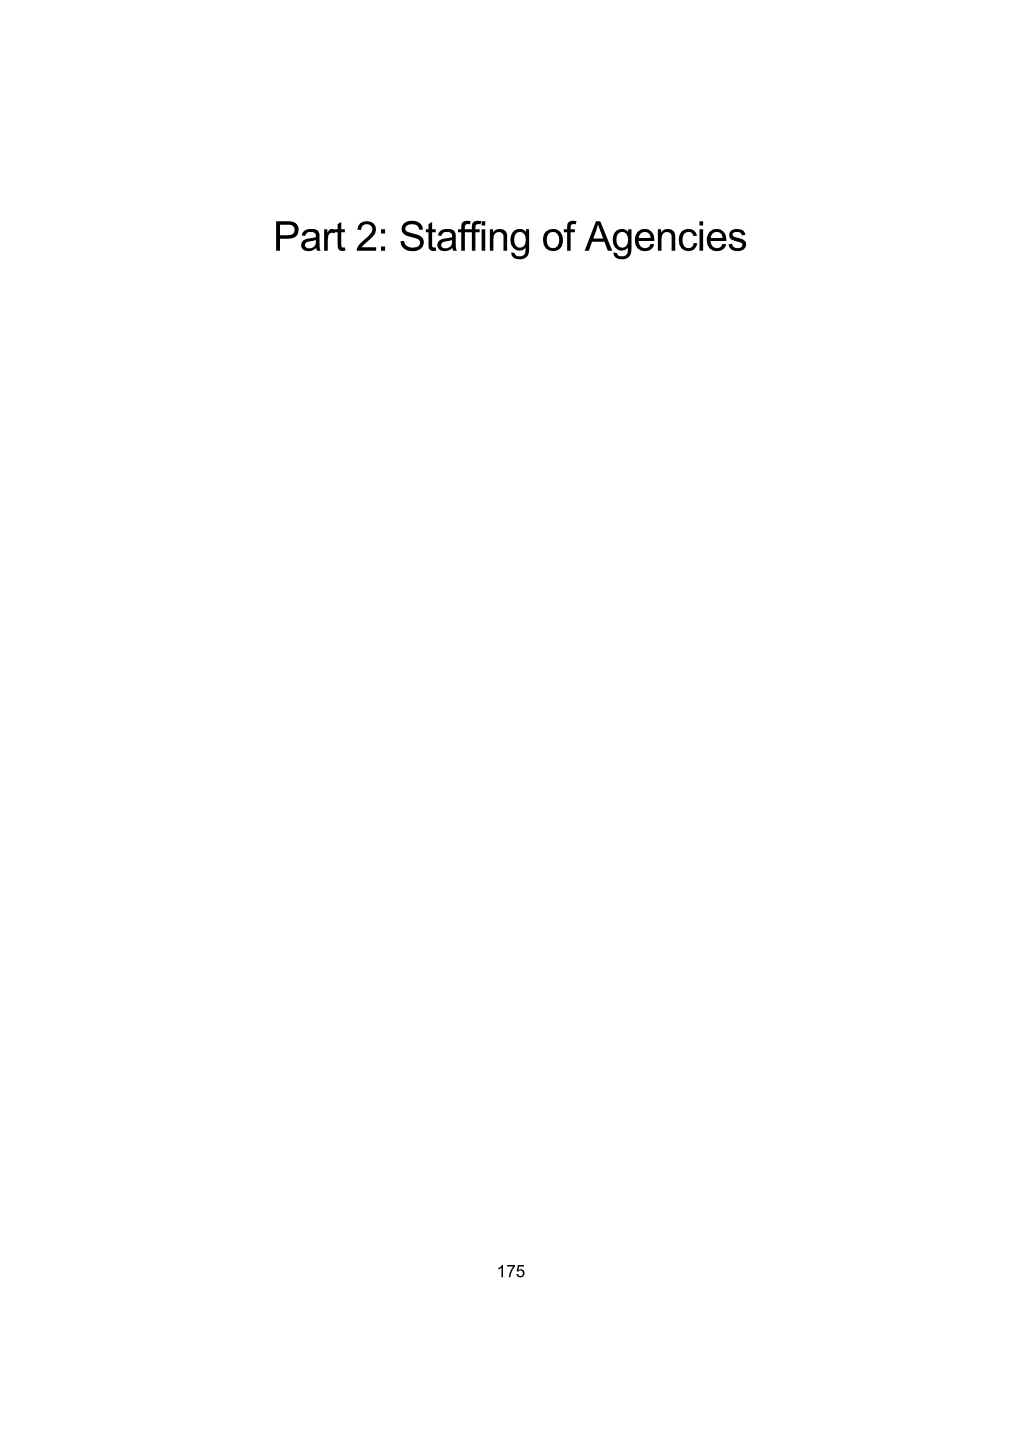 Part 2: Staffing of Agencies